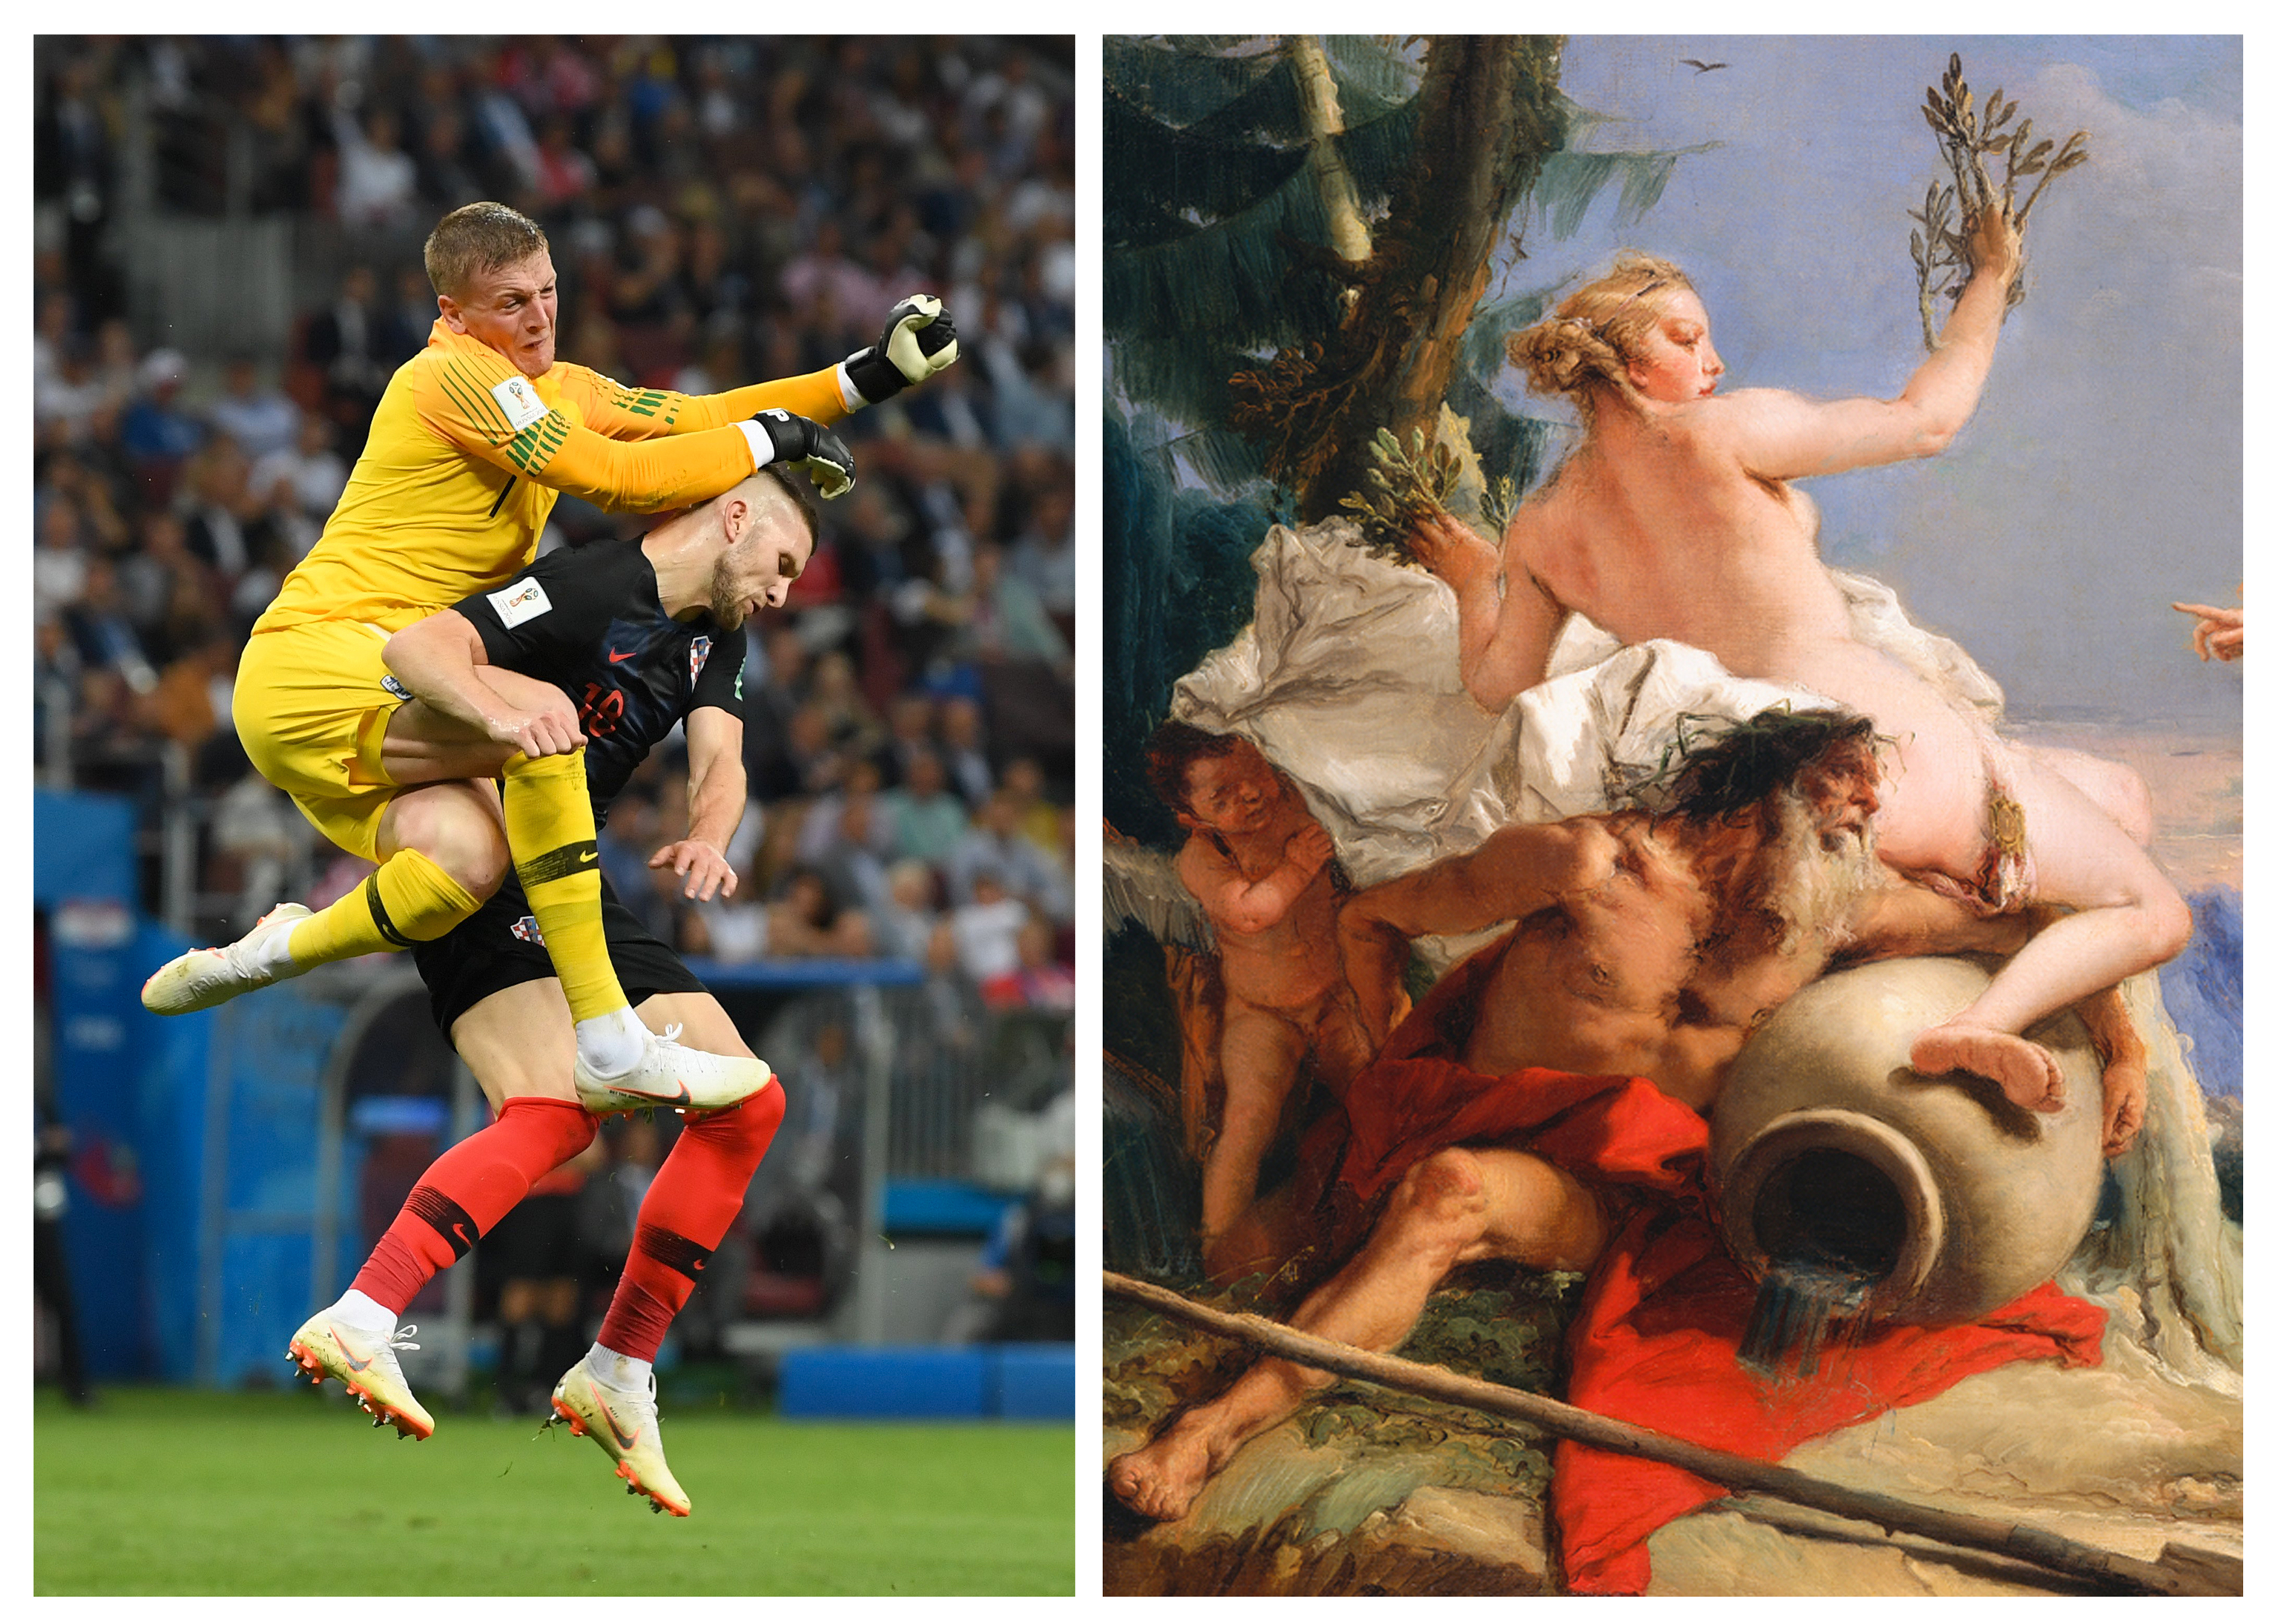 Jordan Pickford of England collides with Ante Rebic of Croatia during the Semi Final game on July 11, 2018.
                  ; Apollo Pursuing Daphne by Giovanni Battista Tiepolo (Matthias Hangst—Getty Images ; National Gallery of Art/Getty Images)